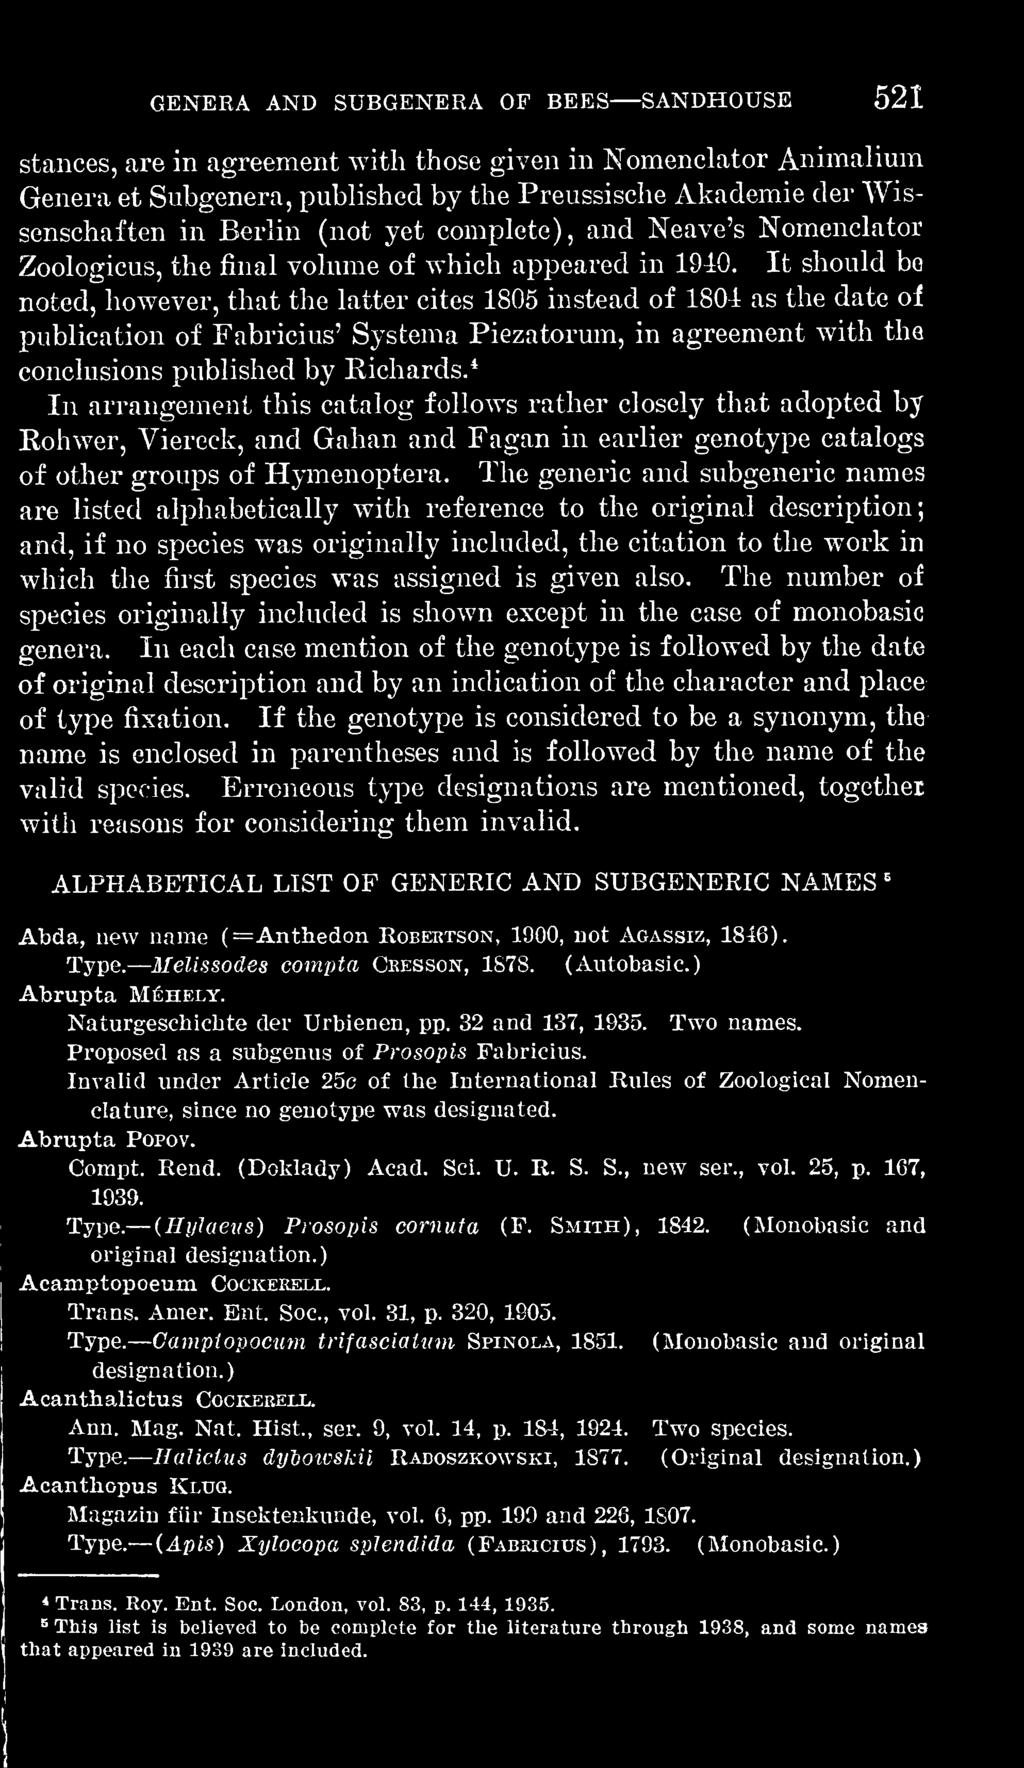 The generic and subgeneric names are listed alpliabetically with reference to the original description; and, if no species was originally included, the citation to the work in which the first species